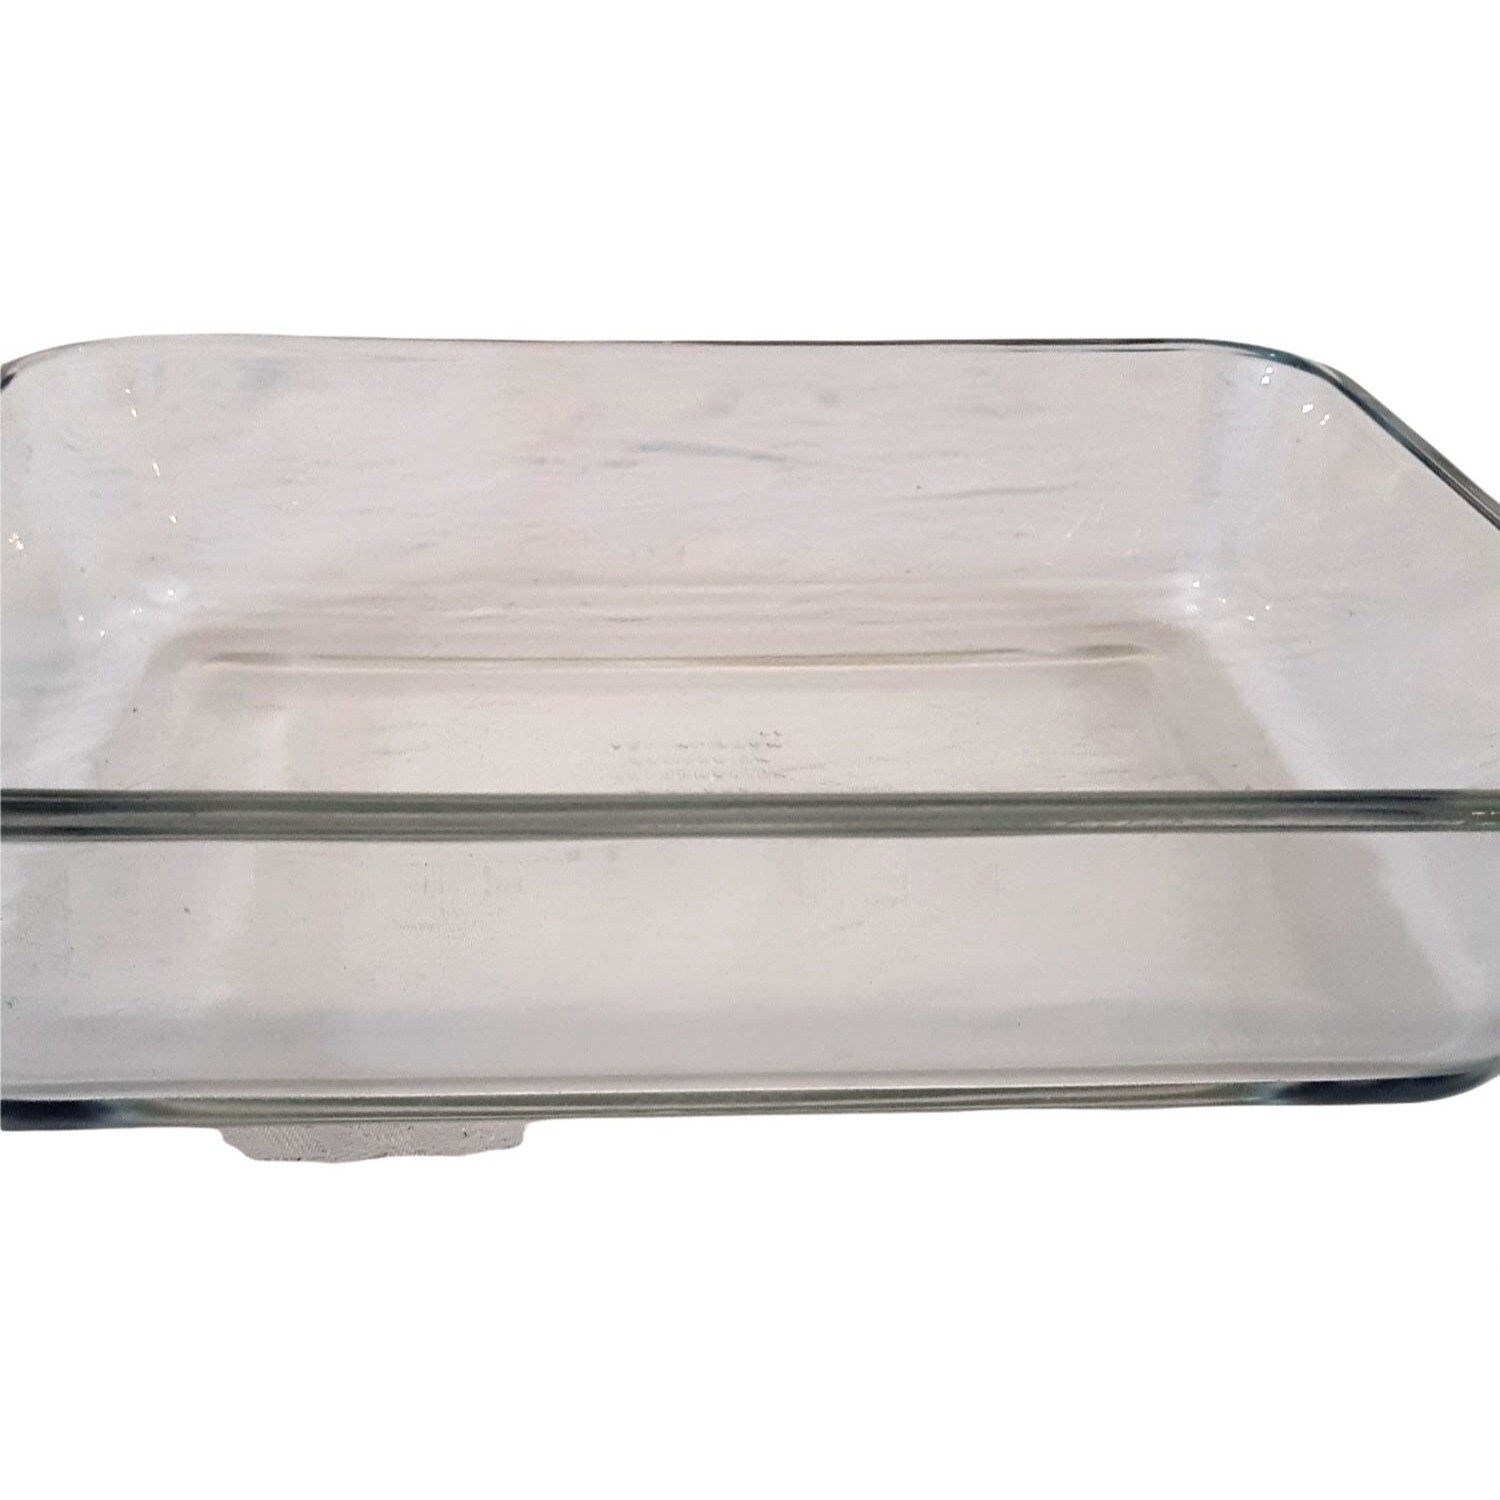 Small 3 Cup Pyrex Baking Dish 7 X 5 X 1.75 Rectangle Oblong Clear Glass 